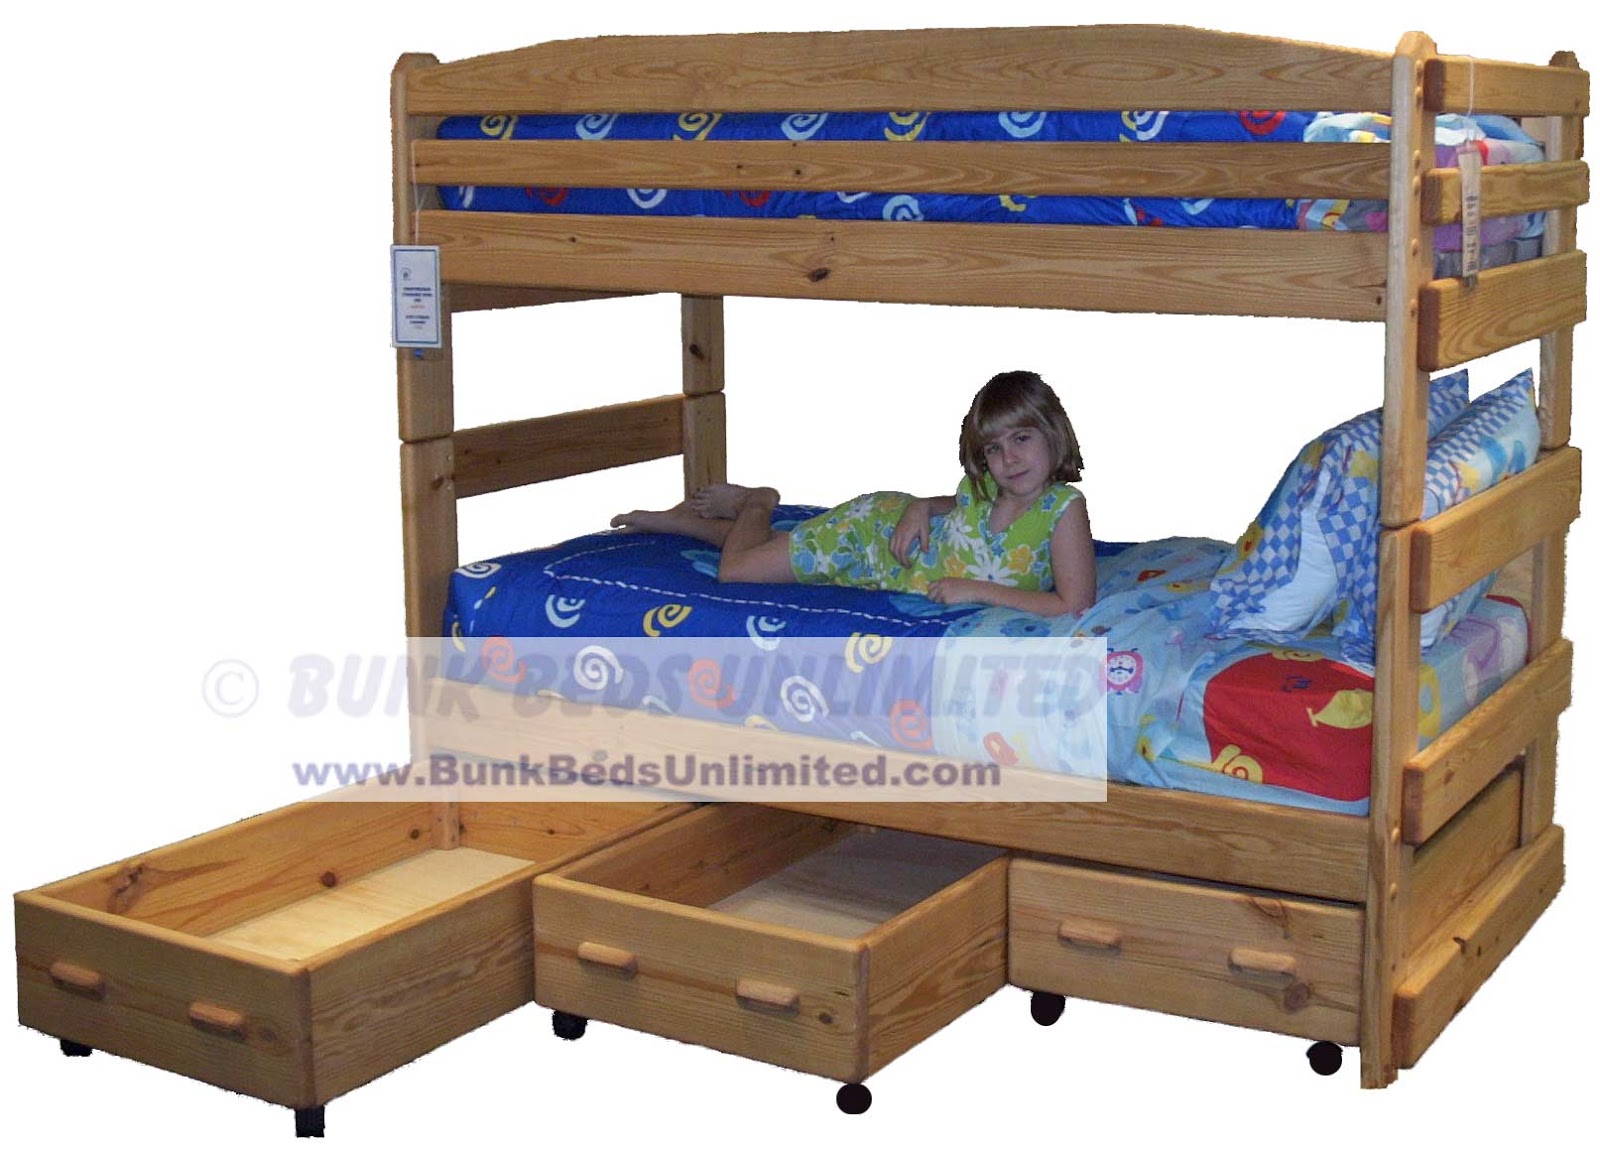 Bunk Beds Unlimited